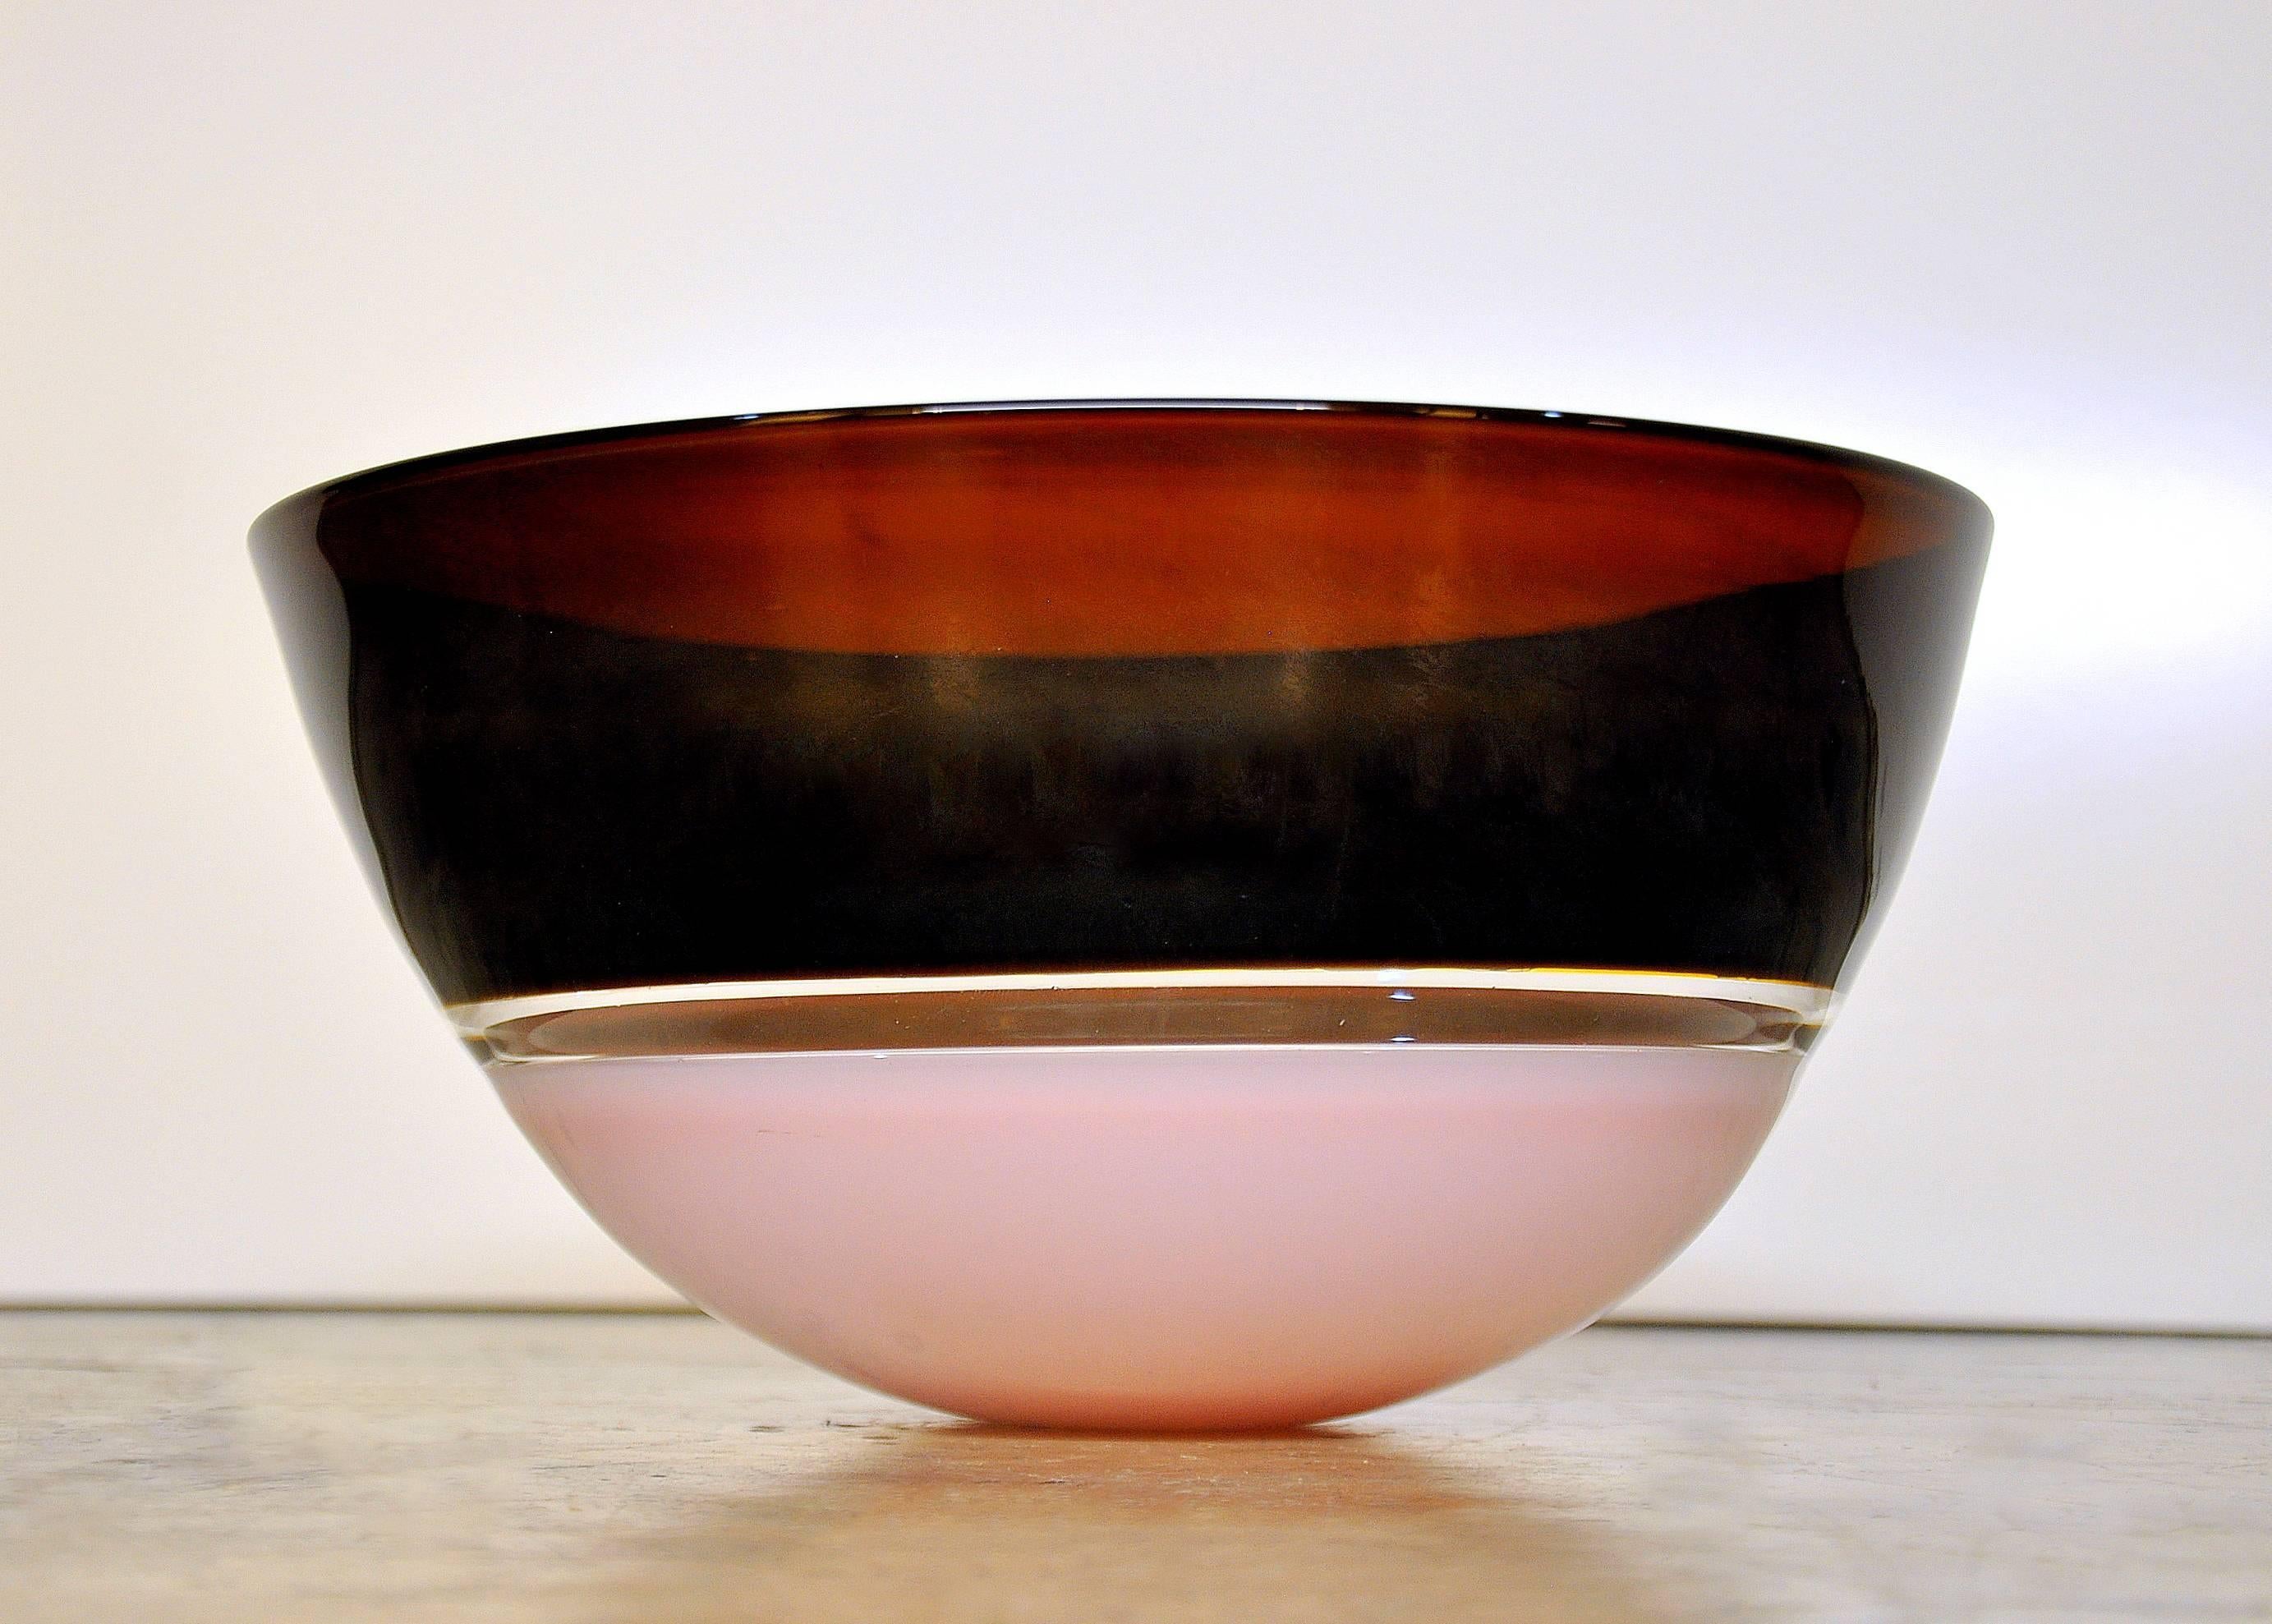 This superb large glass bowl by the internationally acclaimed American blown glass artist Sonja Blomdahl features pale pastel pink and chocolate brown bands. The richness and beauty of the colors need to be seen in person to be truly appreciated, as